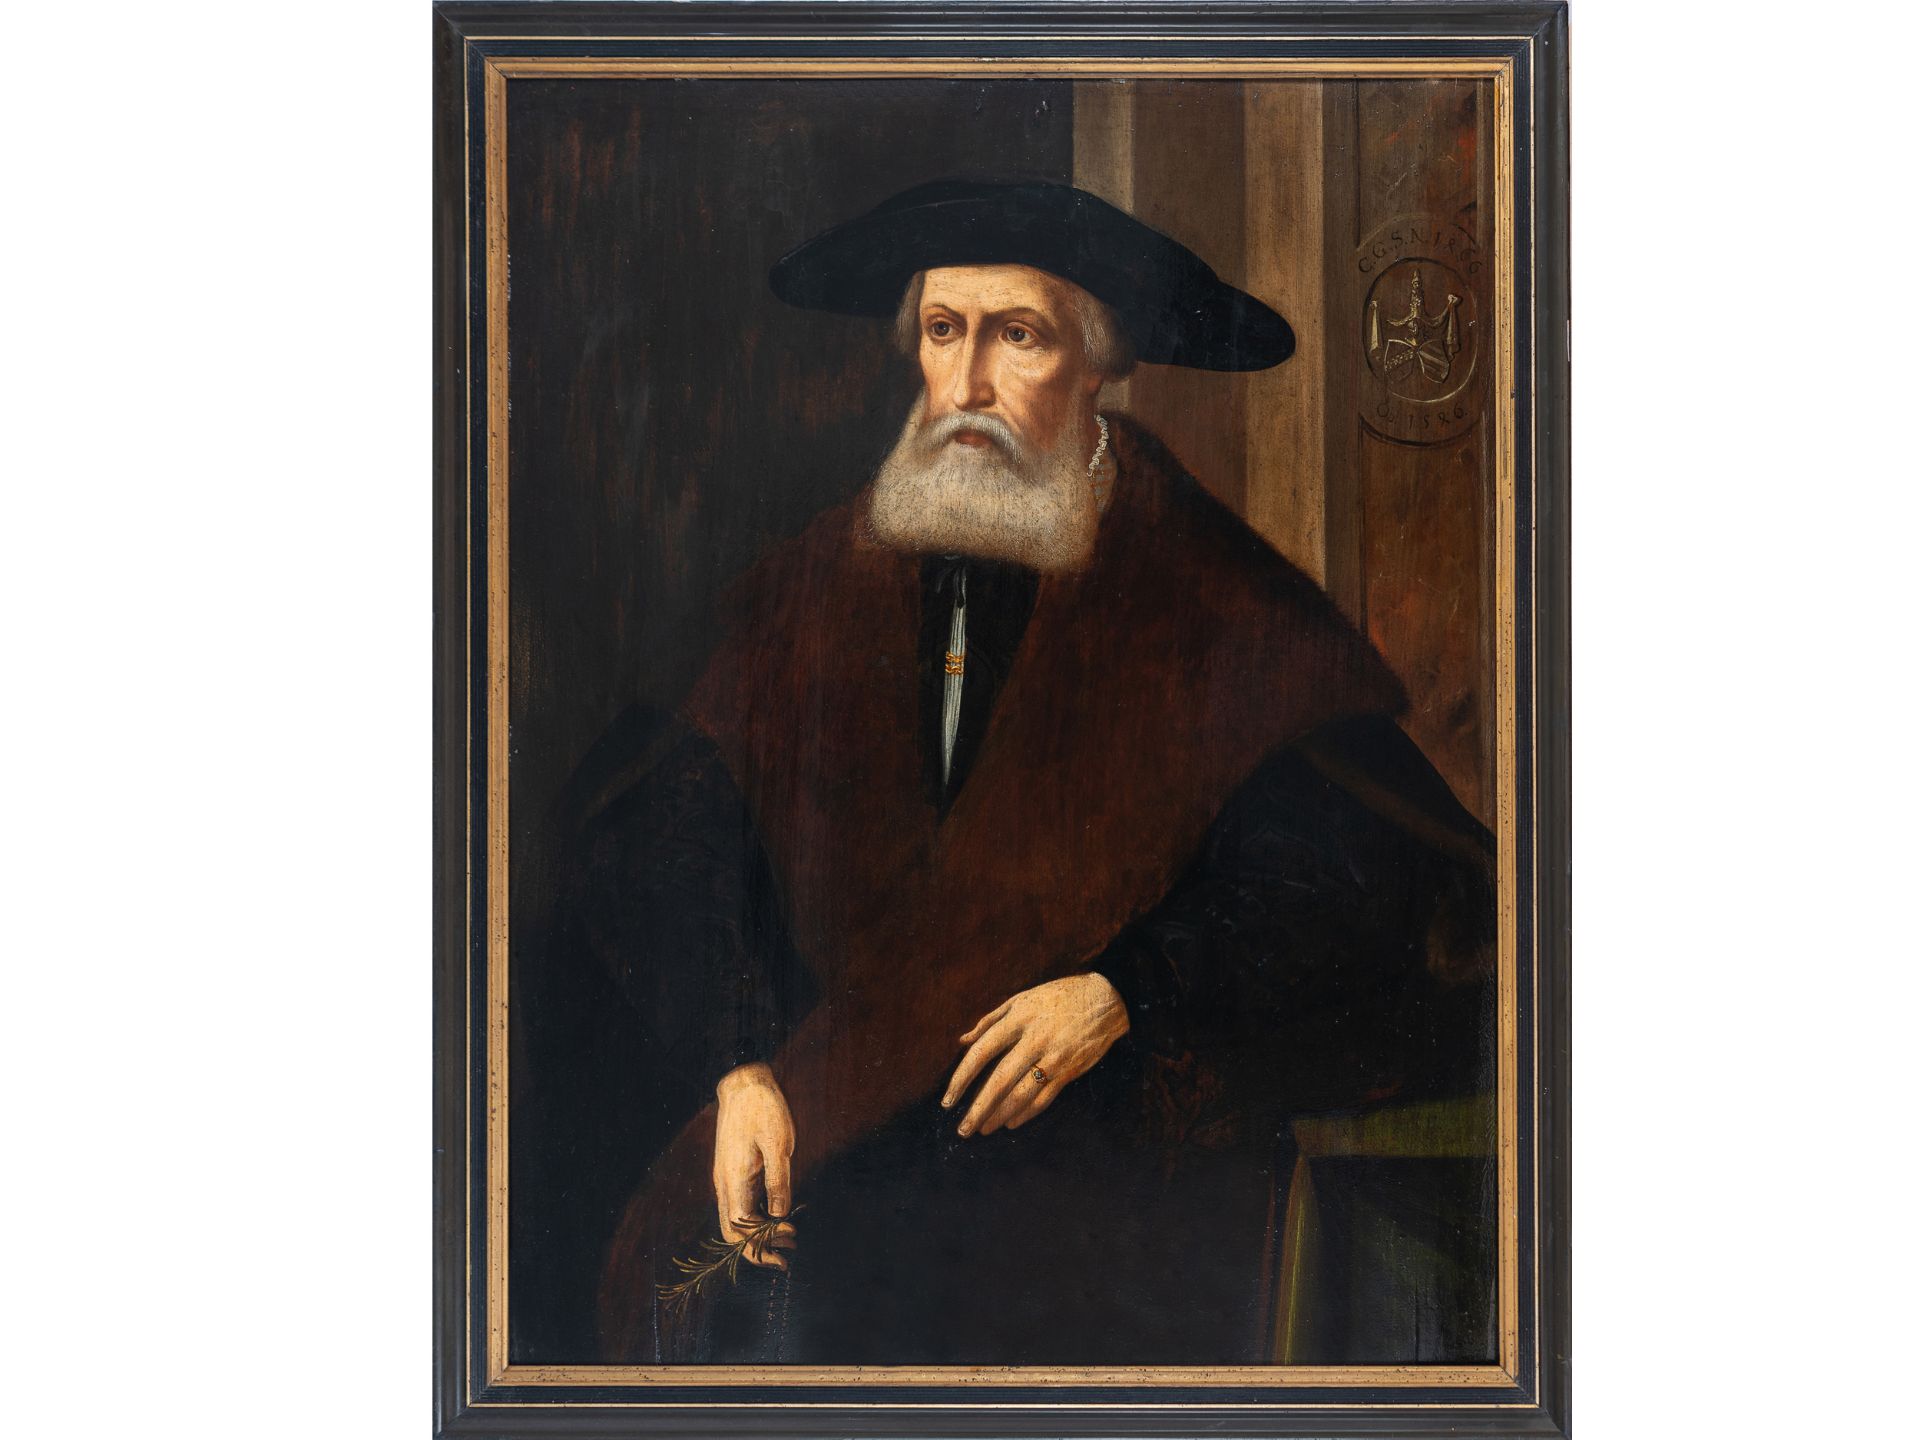 German Master Painter, 1st half of 16th century, Portrait of a Nobleman - Image 2 of 4